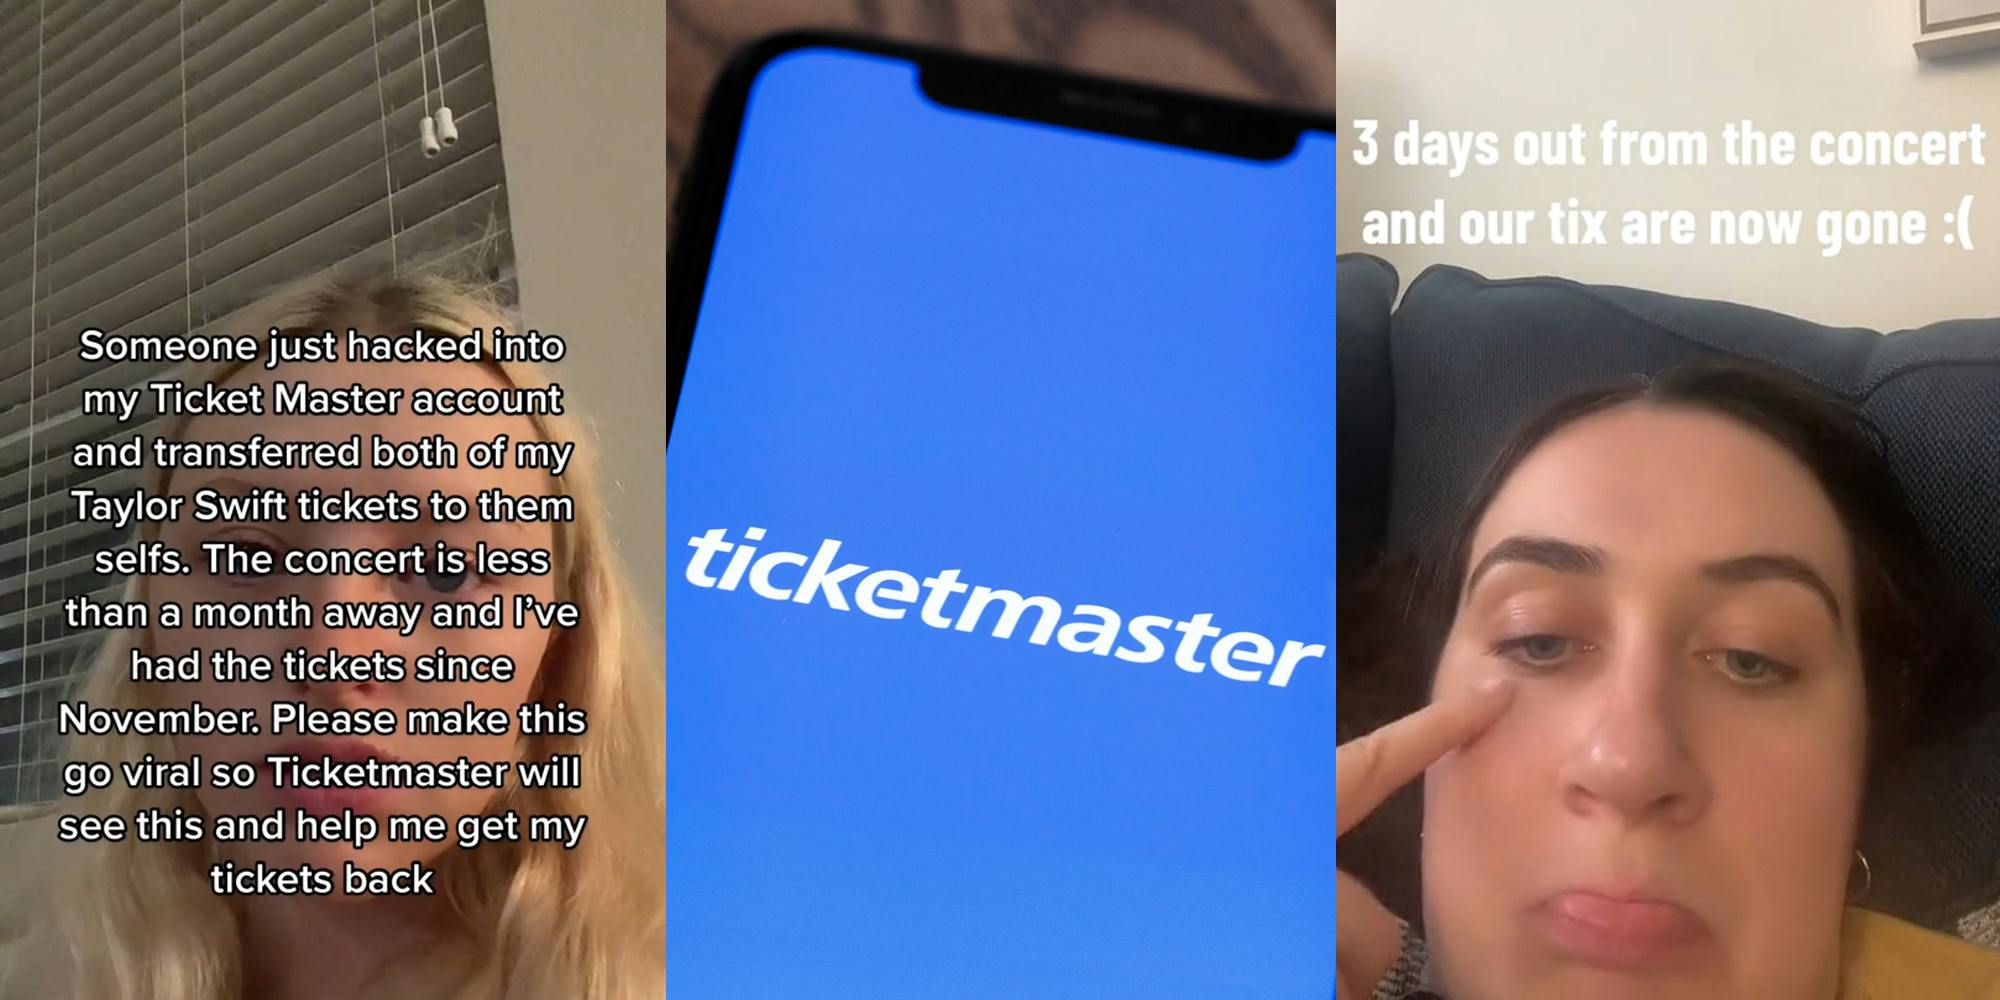 TicketMaster customer with caption "Someone just hacked into my Ticket Master account and transferred both of my Taylor Swift tickets to them selfs. The concert is less than a month away and I've had the tickets since November. Please make this go viral so Ticketmaster will see this and help me get my tickets back" (l) TicketMaster on phone screen (c) TicketMaster customer with caption "3 days out from the concert and our tix are now gone :(" (r)